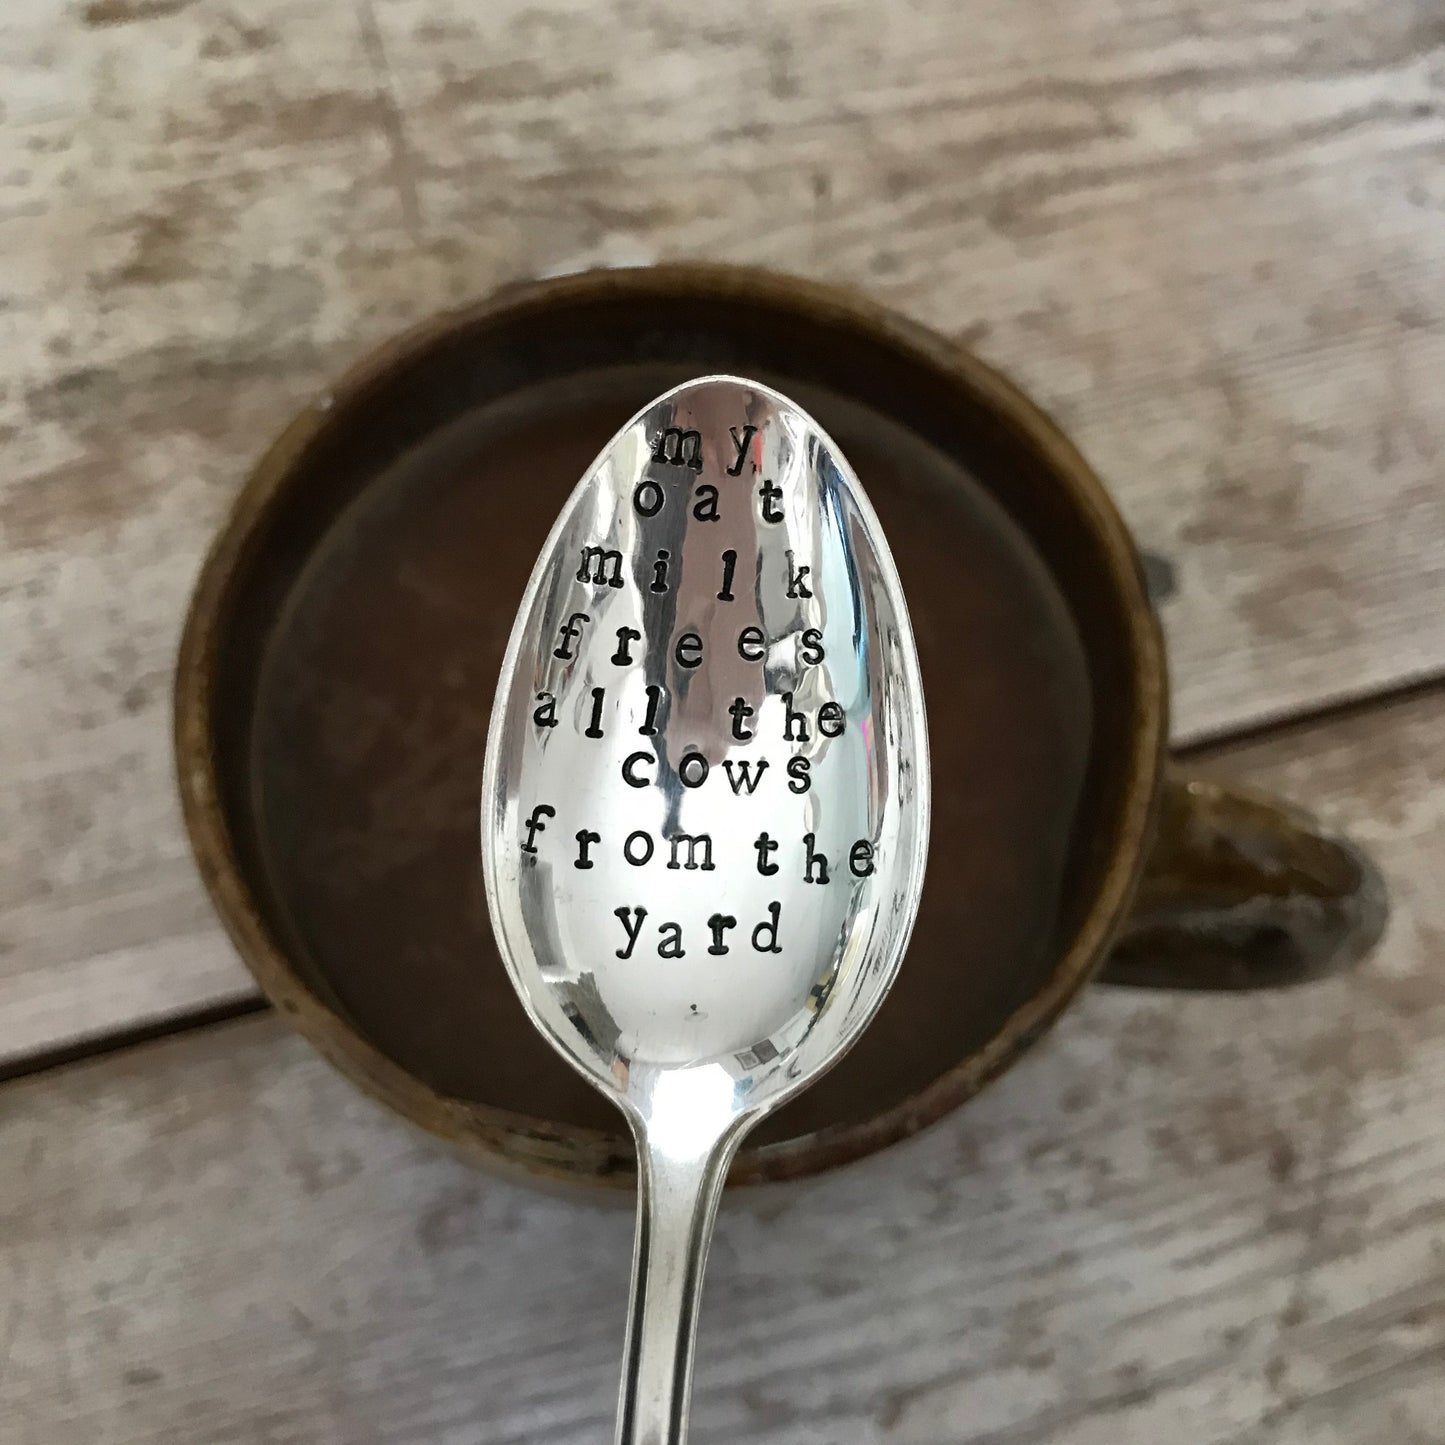 My Oat Milk Frees all the Cows from the Yard - Vintage Teaspoon